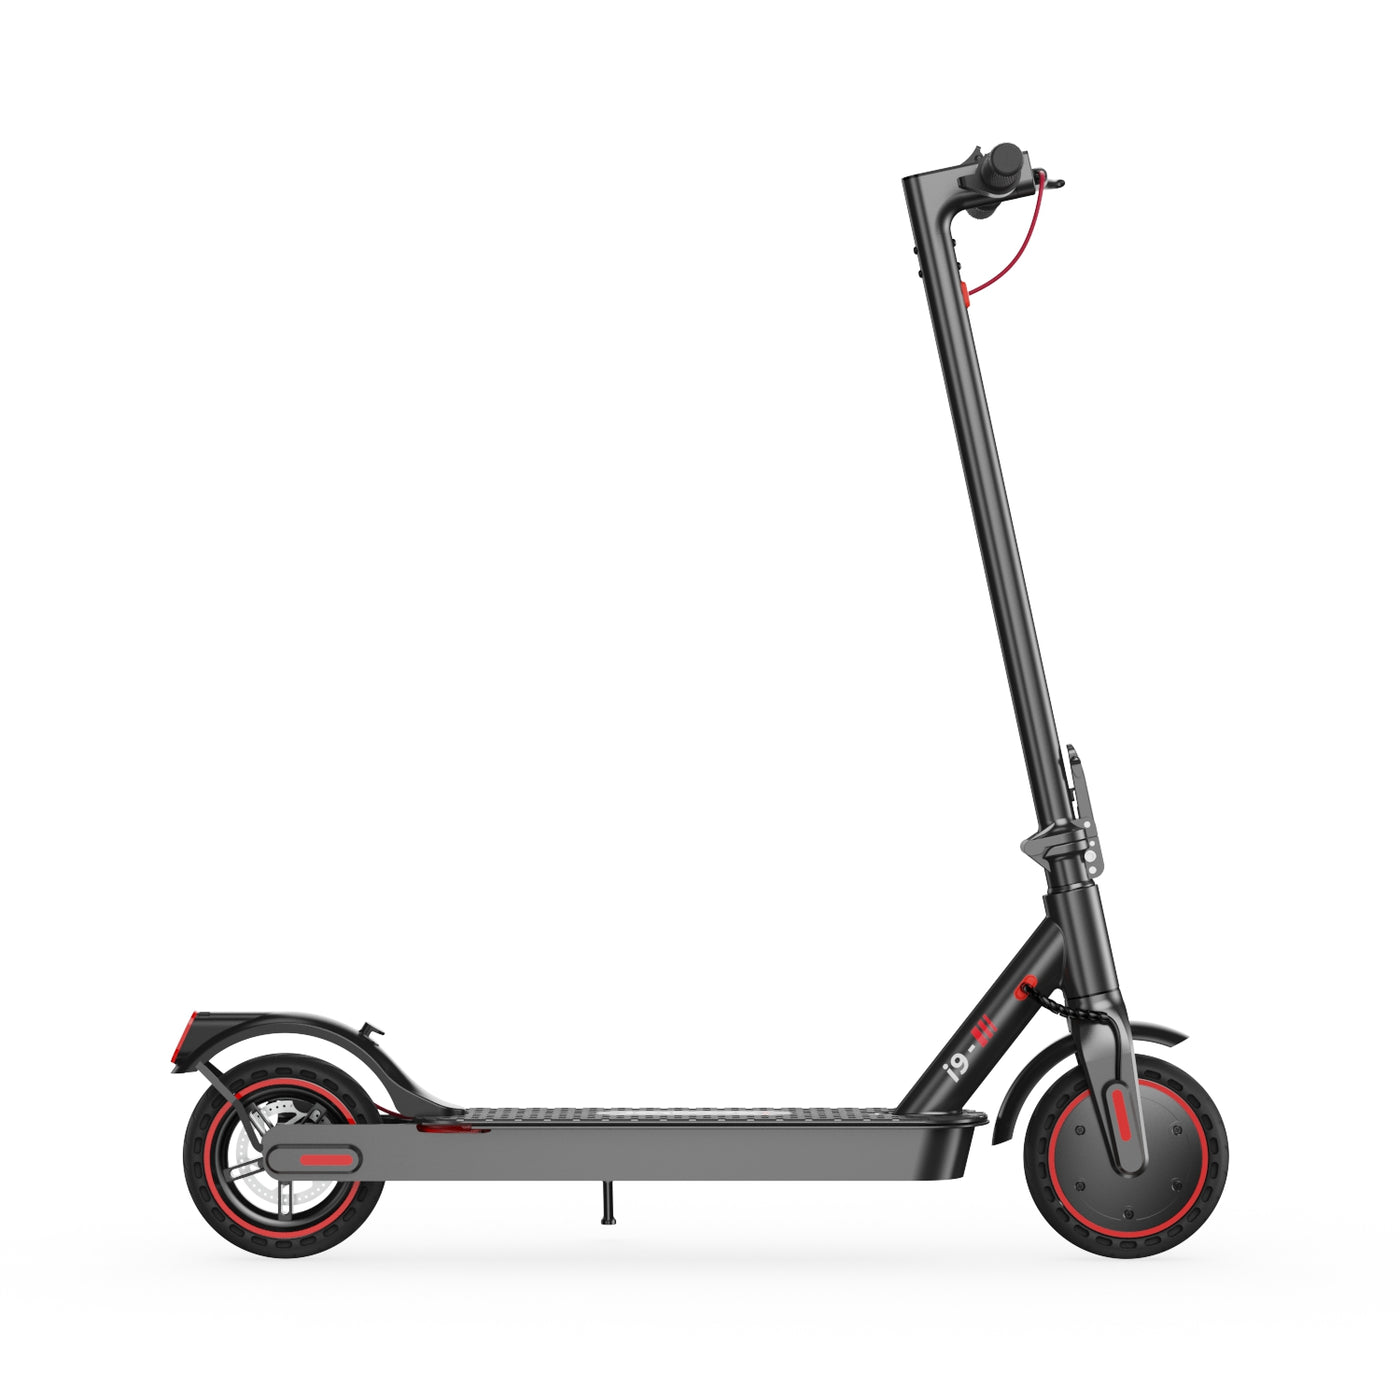 The front of an electric scooter